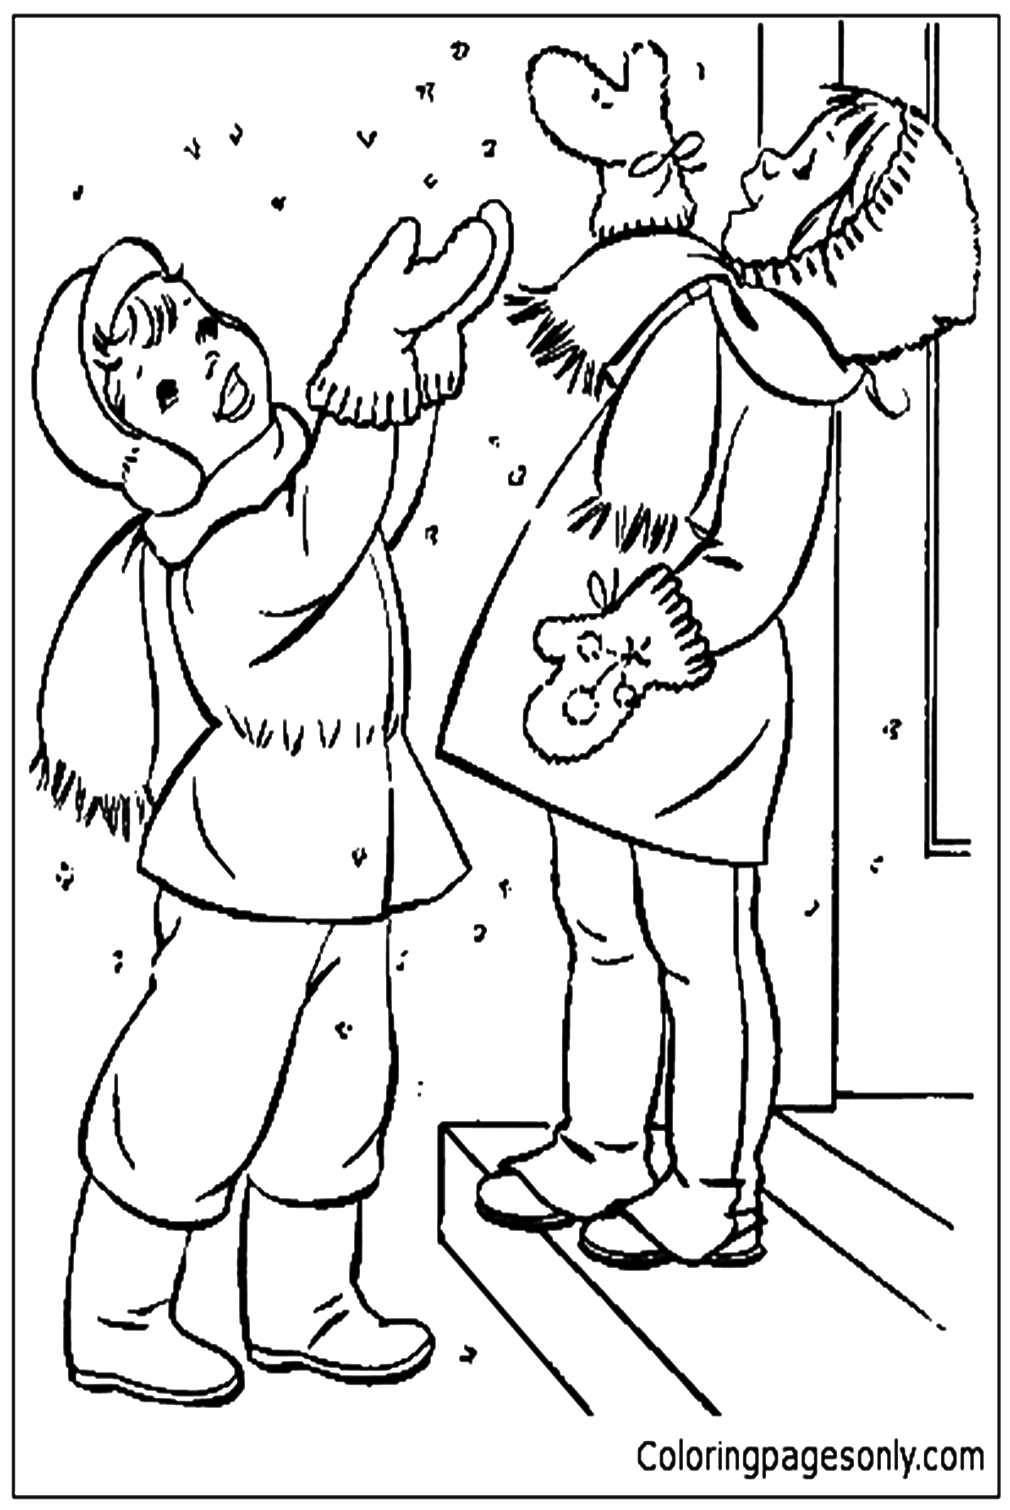 The Children Wear Warm In The Winter Coloring Pages